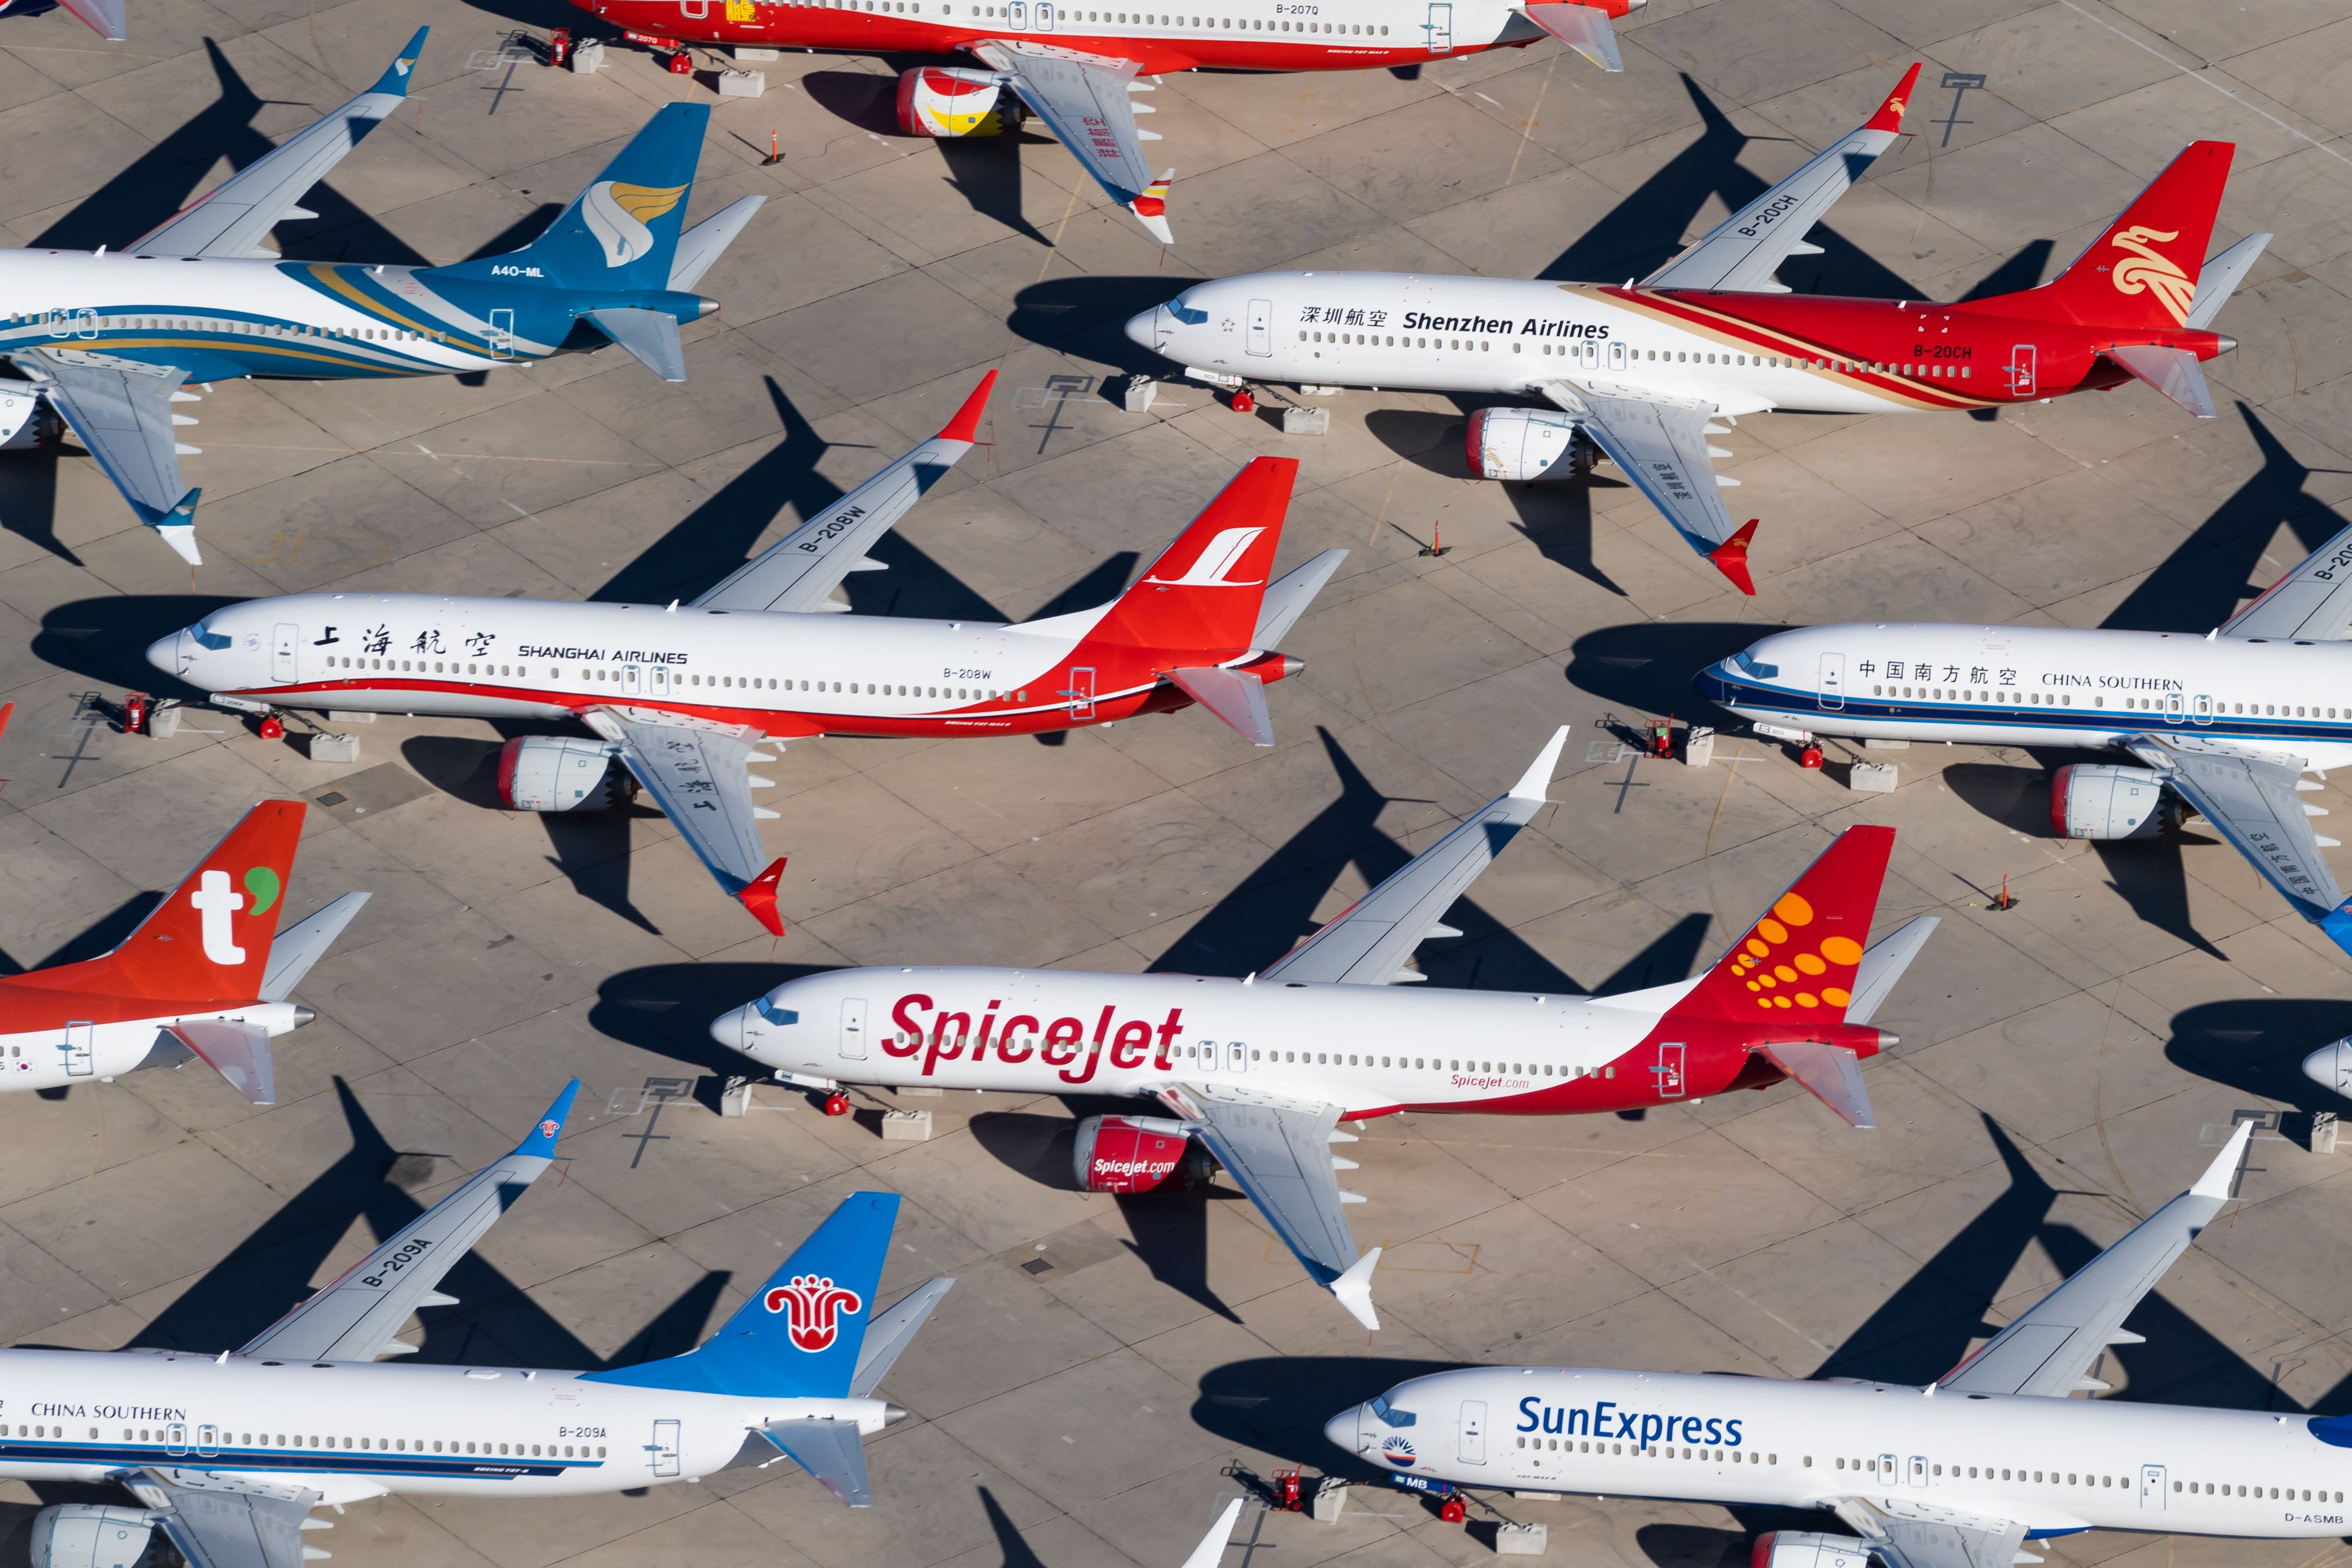 View from the sky of Boeing 737 MAX 8 aircraft stored on the ground.